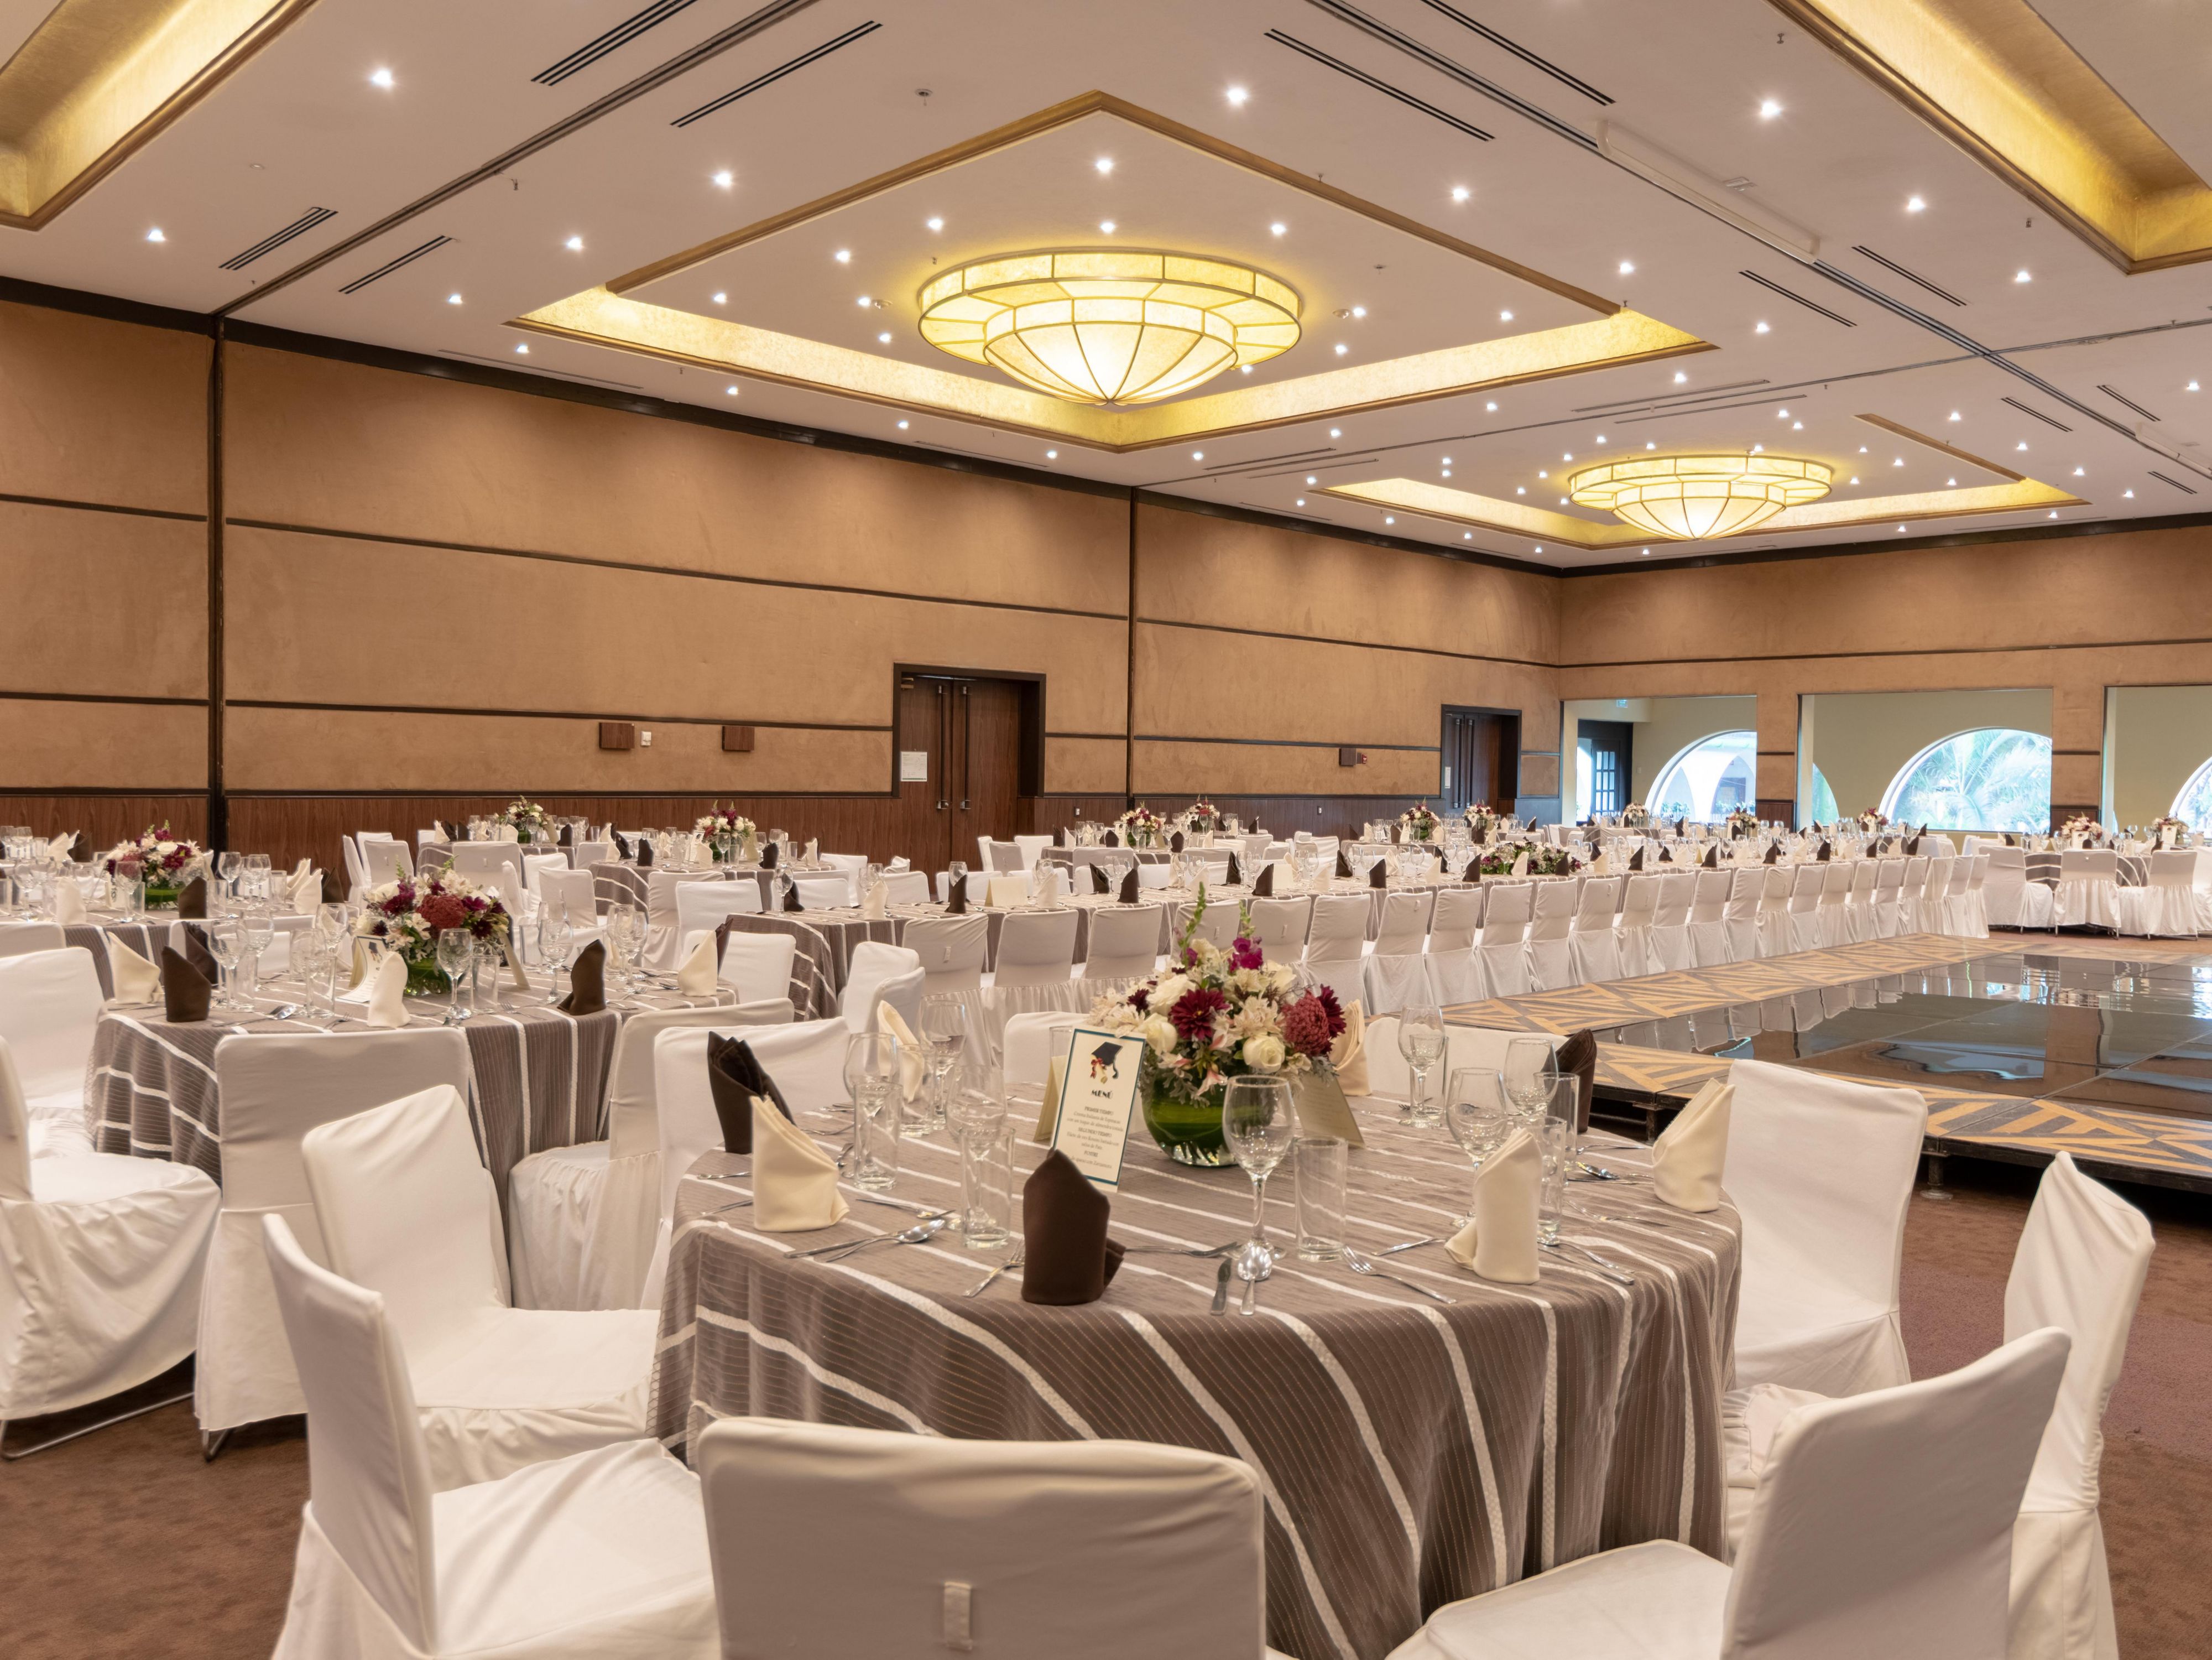 Because we want your event to be unforgettable, allow us to grant you the best service and facilities for your social or business events in our 13 rooms with capacity for up to 800 people. We have the experience and attention to serve you as you deserve.